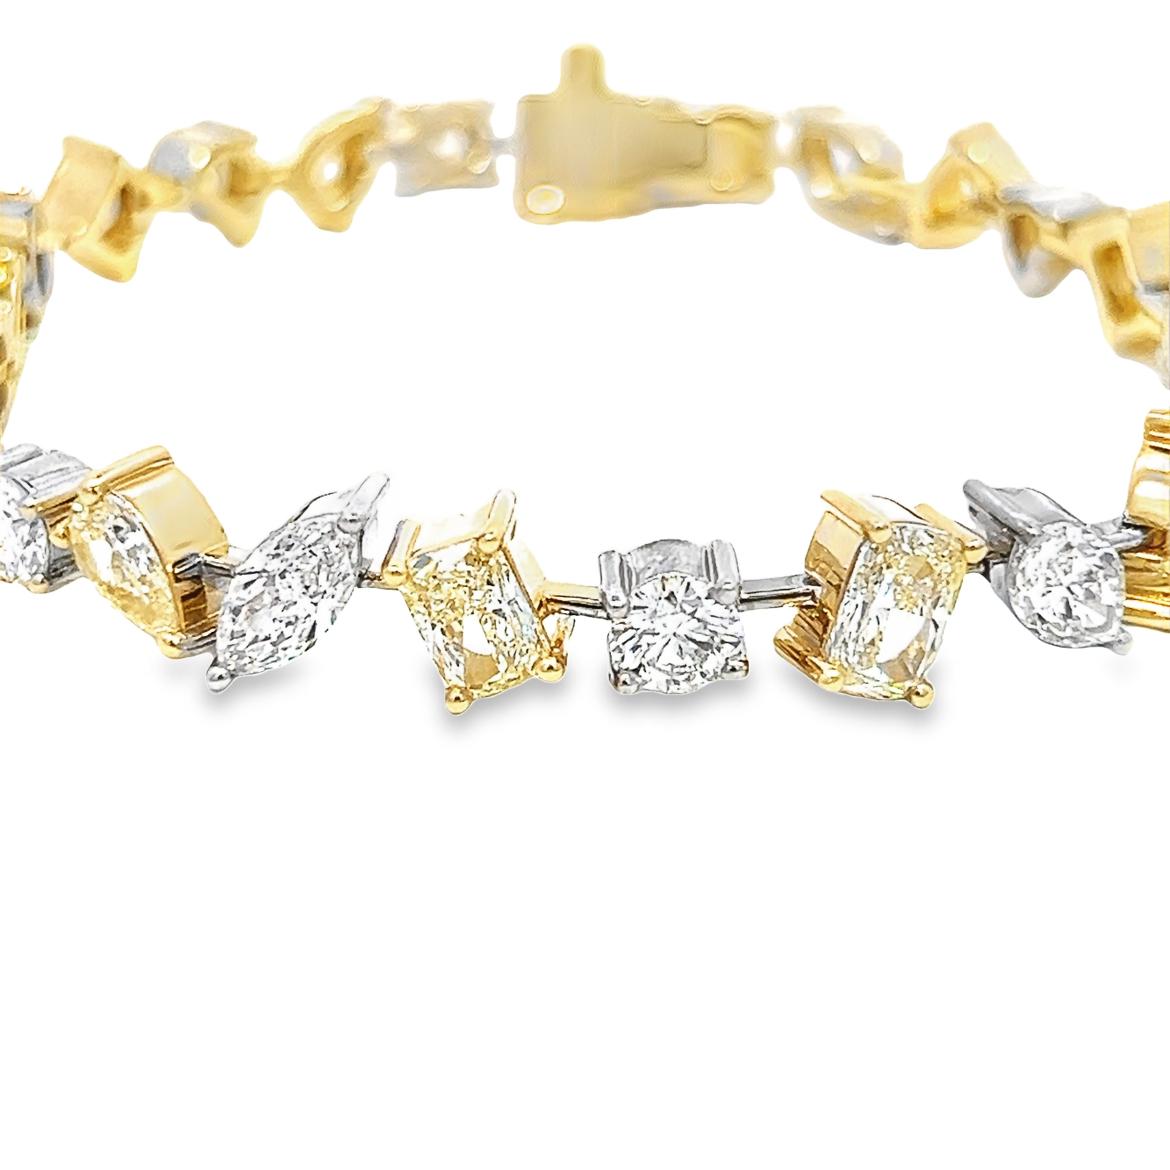 Mixed Cut 13.12CT Total weight  Natural Multi-shape Diamond Bracelet, Set in 18KY/W Gold For Sale